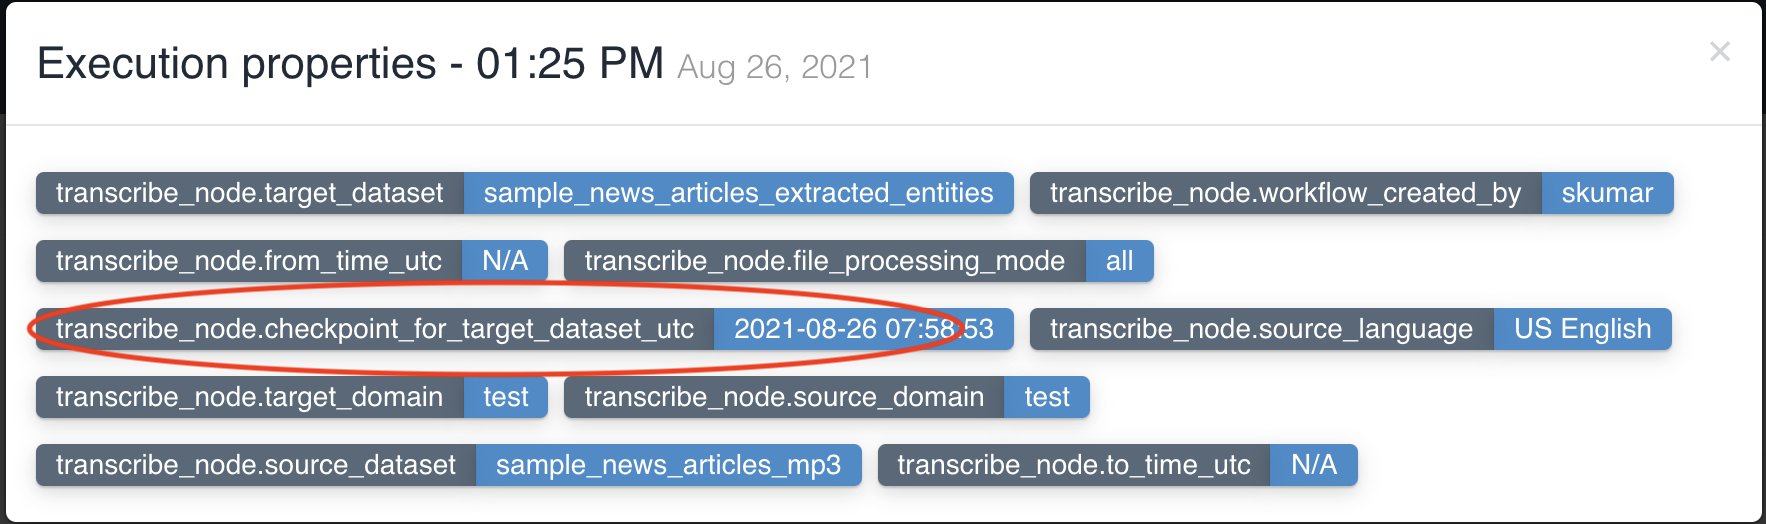 Workflow execution properties updated by transcribe node